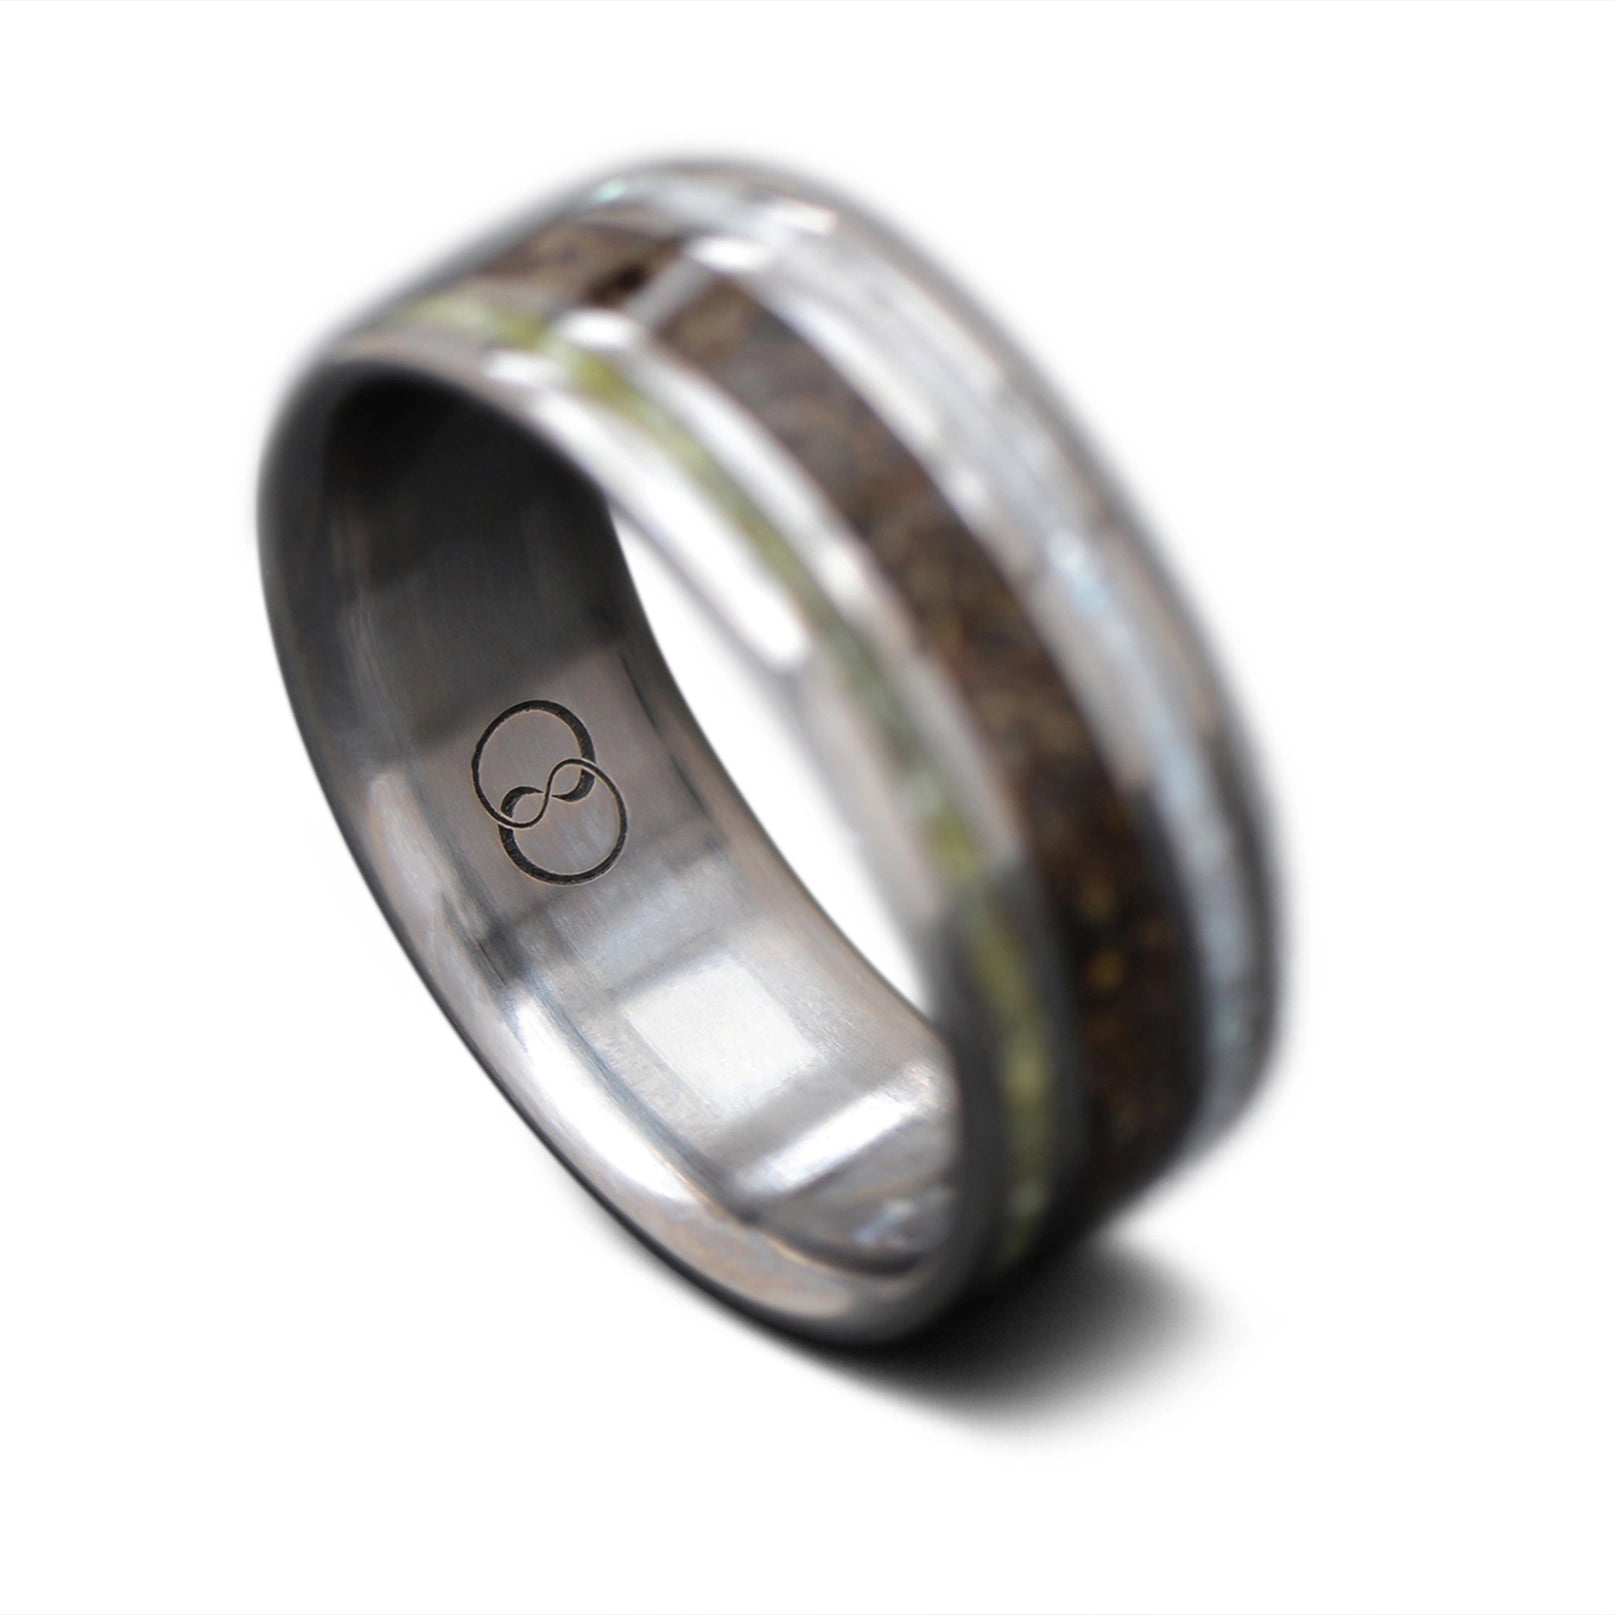 Unique Titanium Wedding Band with T-Rex, Jade & Mother of Pearl Inlay